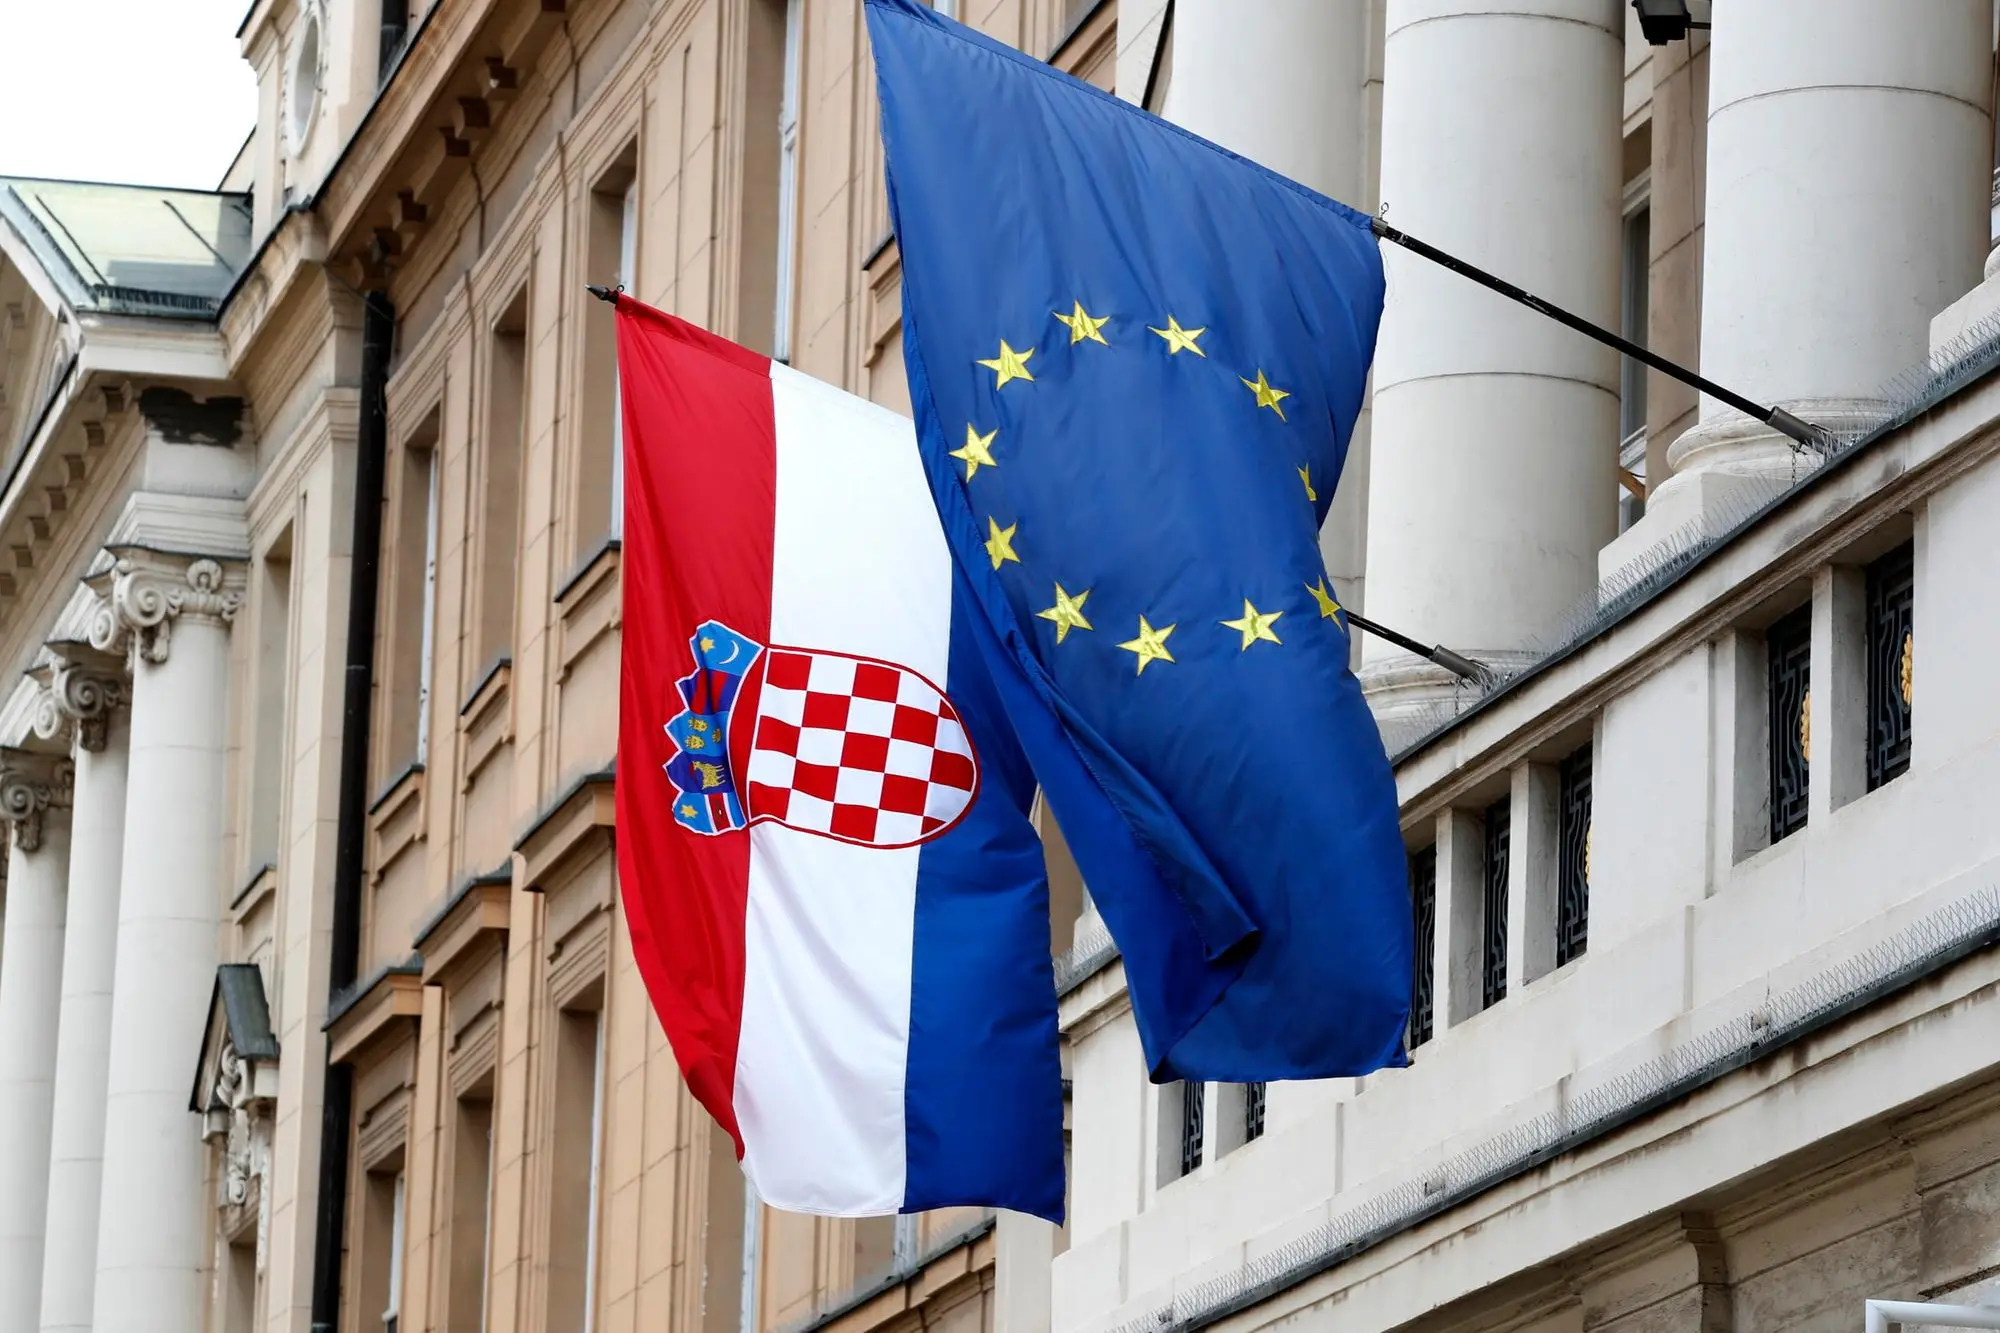 epa09960504 The flags of Croatia (L) and European Union (EU) hang from the facade of the Parliament building at old town in Zagreb, Croatia, 20 May 2022. Croatia, which joined the EU in 2013, is set to join the Eurozone in January 2023, with the introduction of the euro as the country's official currency after Croatian lawmakers voted in favor of legislation to bring the shared currency. EPA/ANTONIO BAT